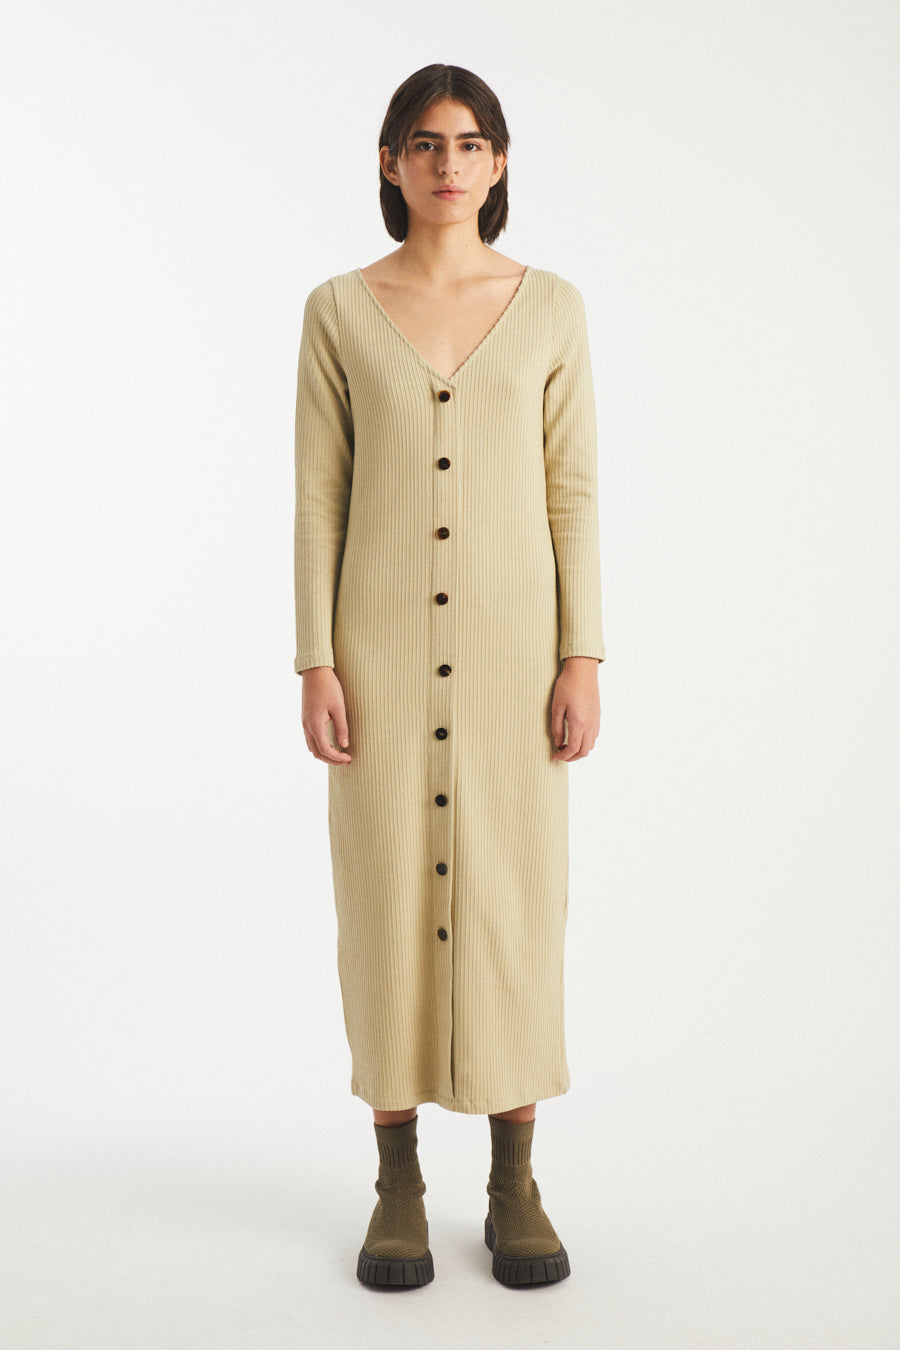 HOFFMAN FITTED KNIT BUTTONED DRESS - Abito con bottoni